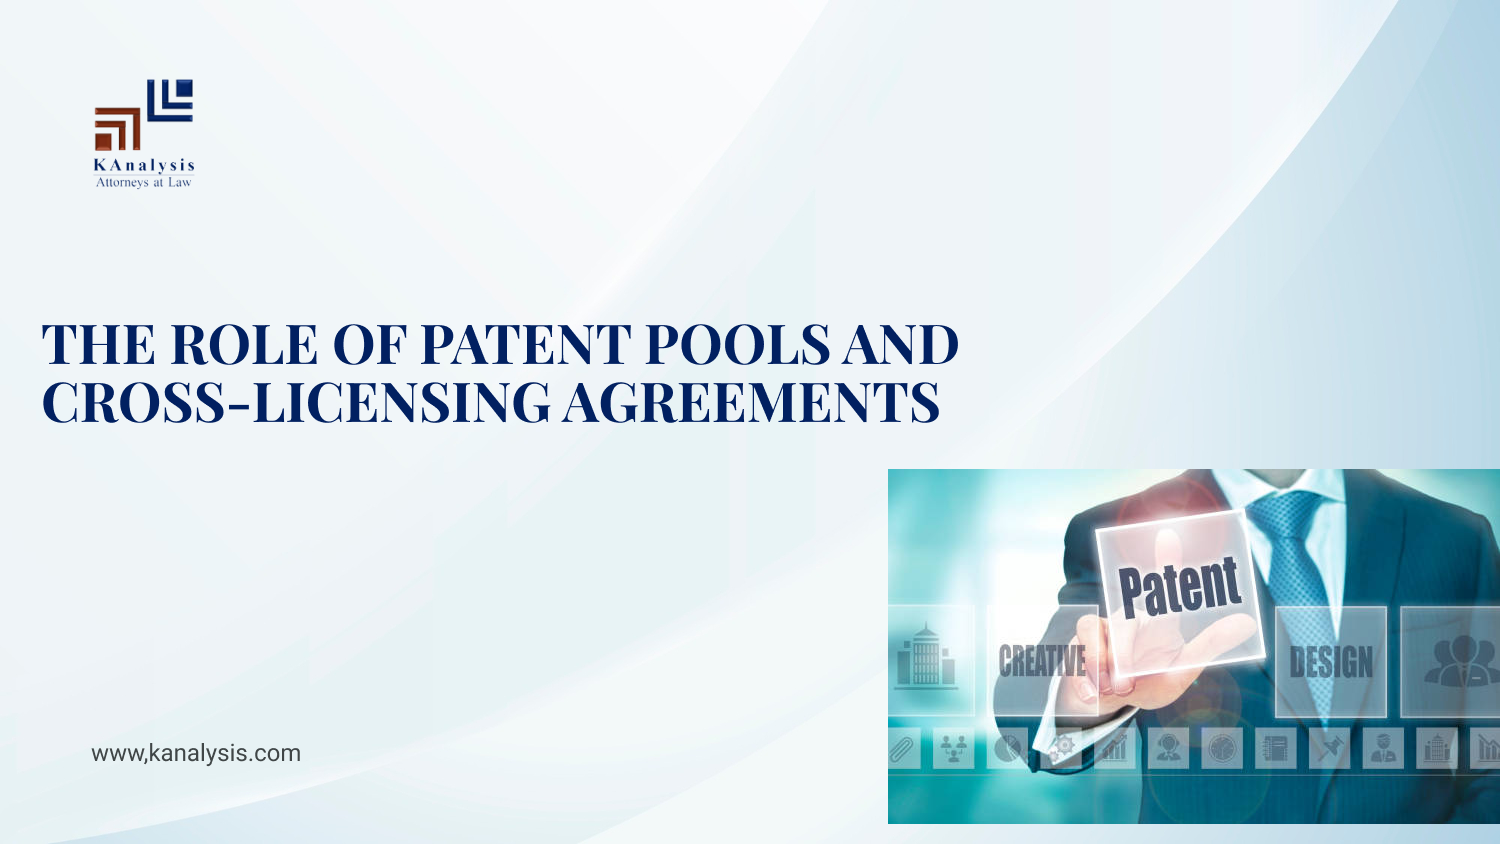 THE ROLE OF PATENT POOLS AND CROSS-LICENSING AGREEMENTS